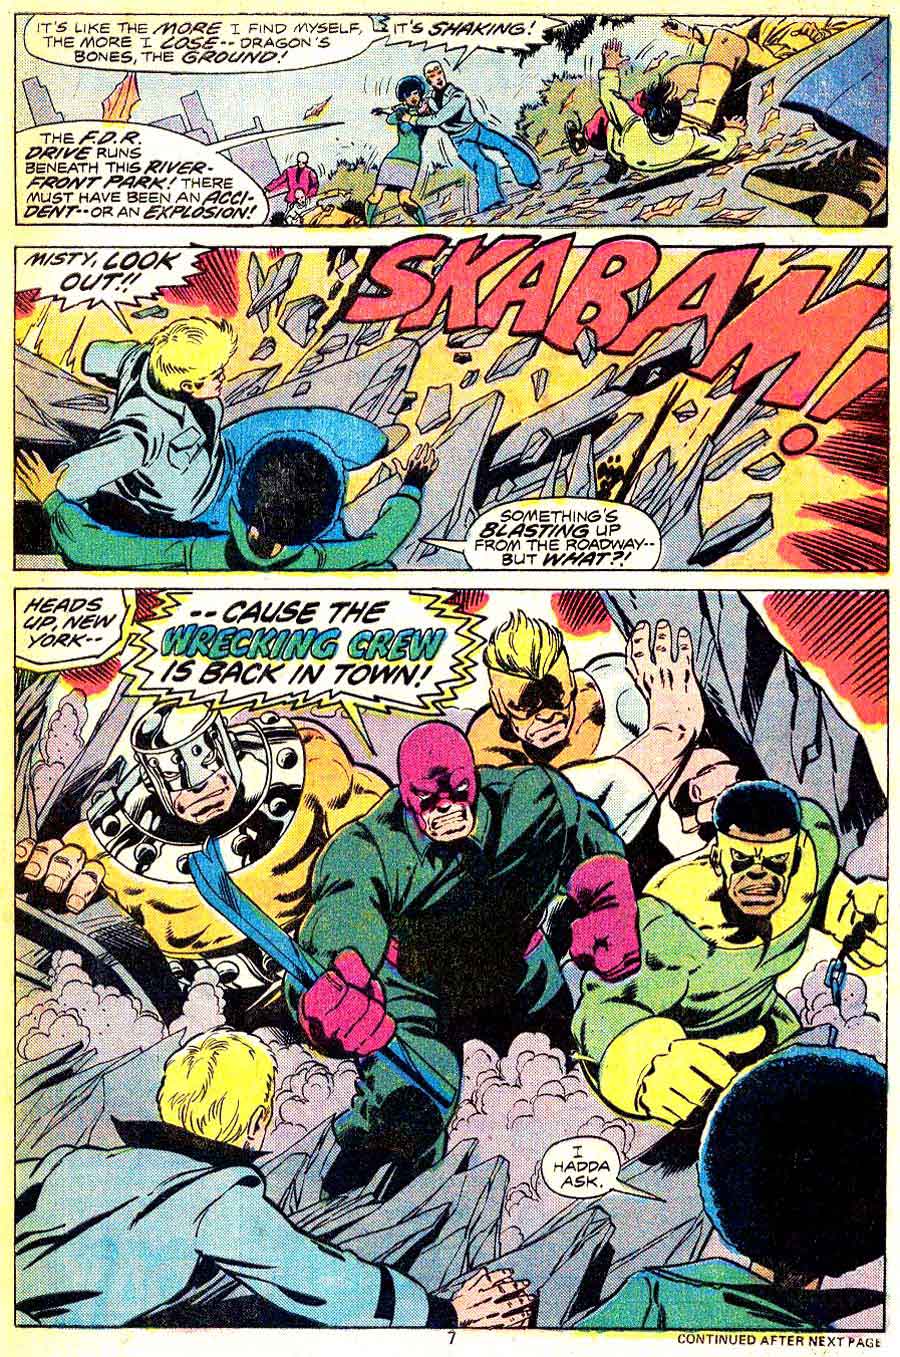 Iron Fist #11 bronze age 1970s marvel comic book page art by John Byrne